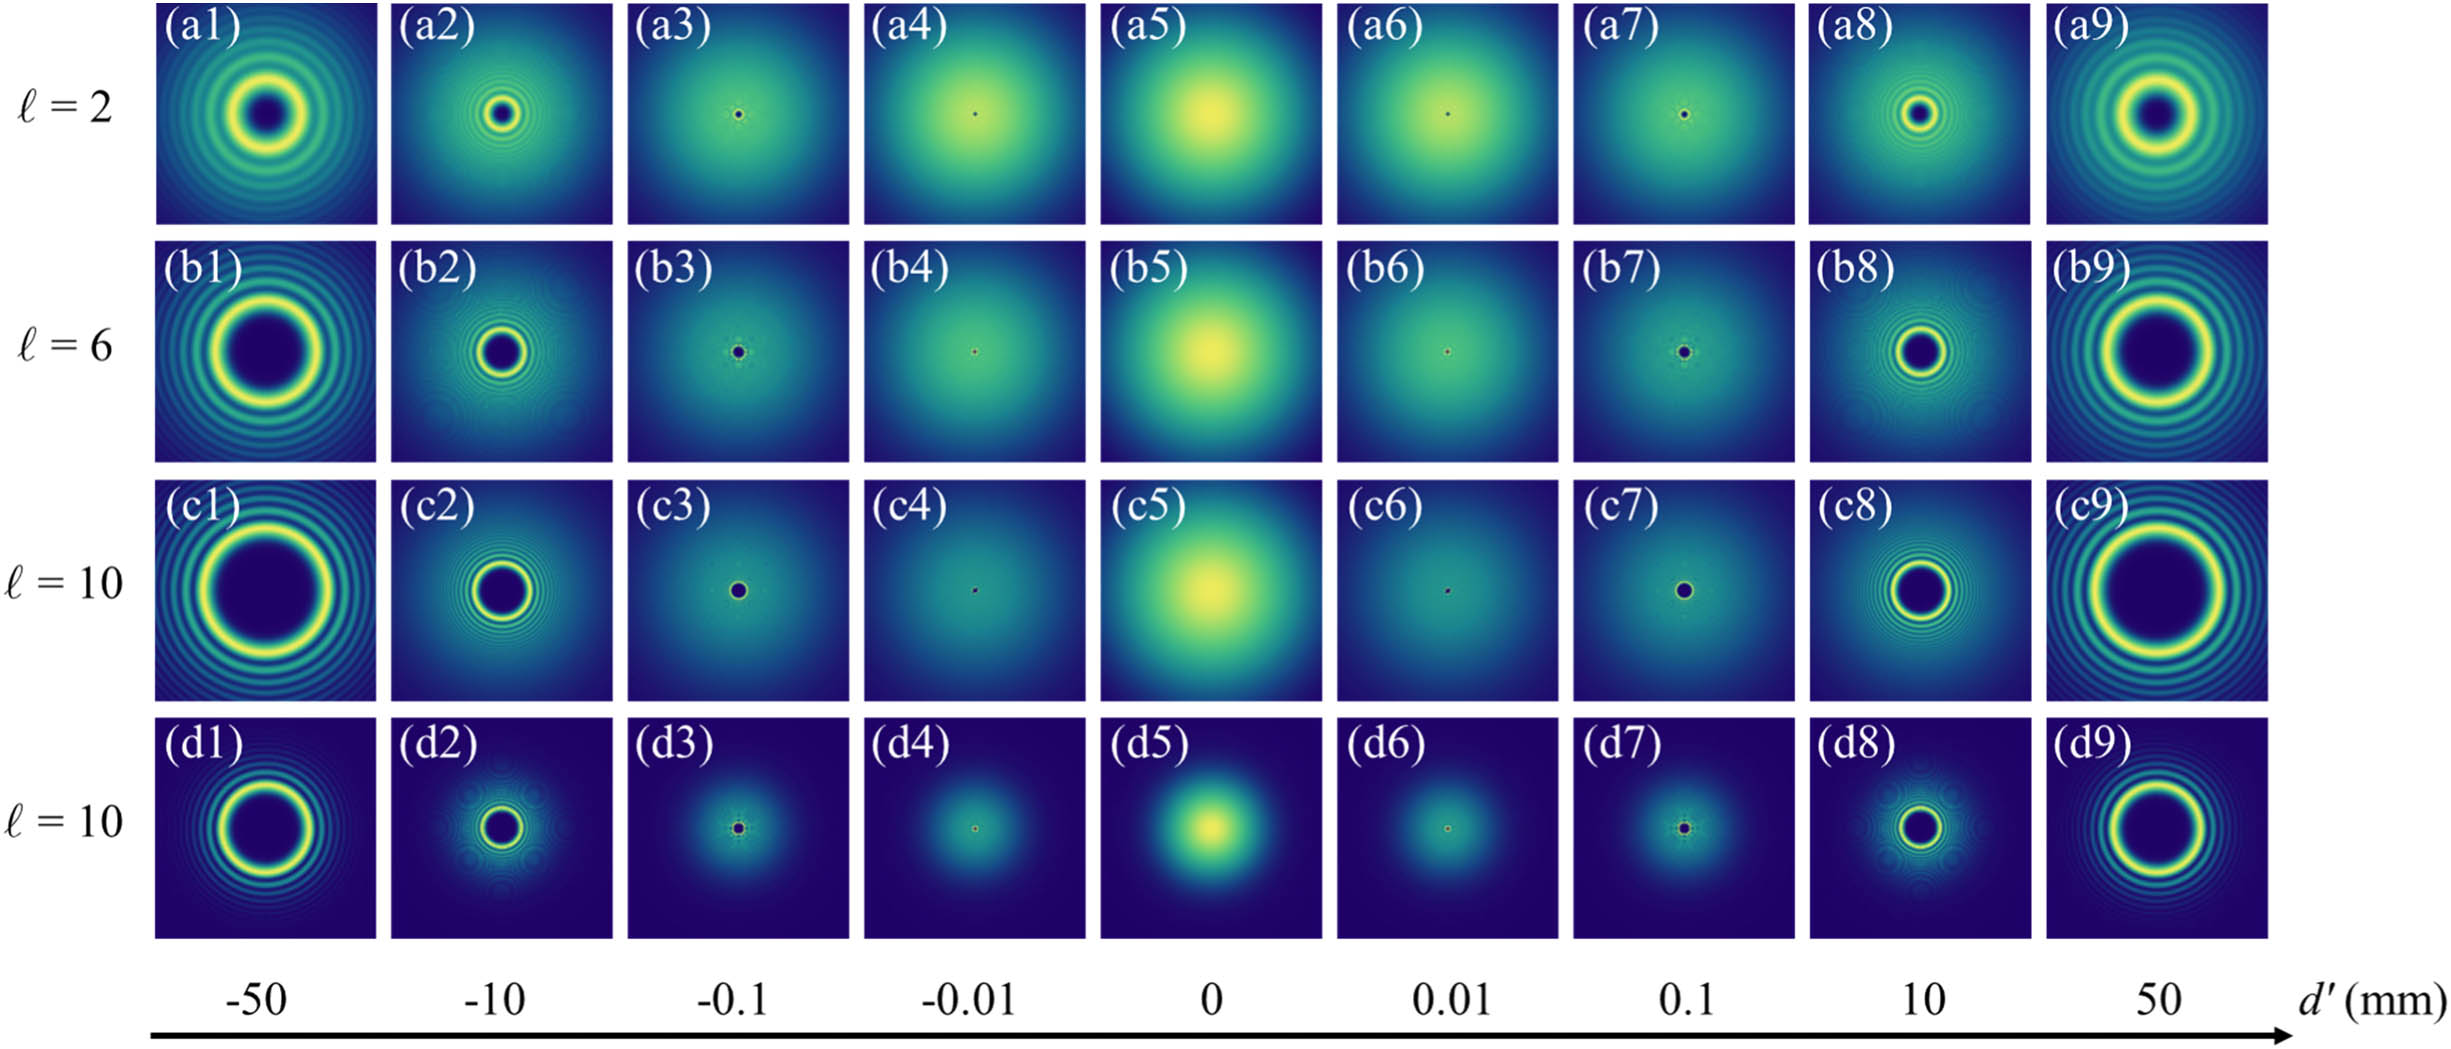 Simulation results for the propagation behavior of Stokes beams with l=2, 6, and 10 near the image plane through (a)–(c) two lenses with f1=f2=10 cm, respectively, and (d1)–(d9) two lenses with f1=10 cm and f2=5 cm, respectively, for l=10.